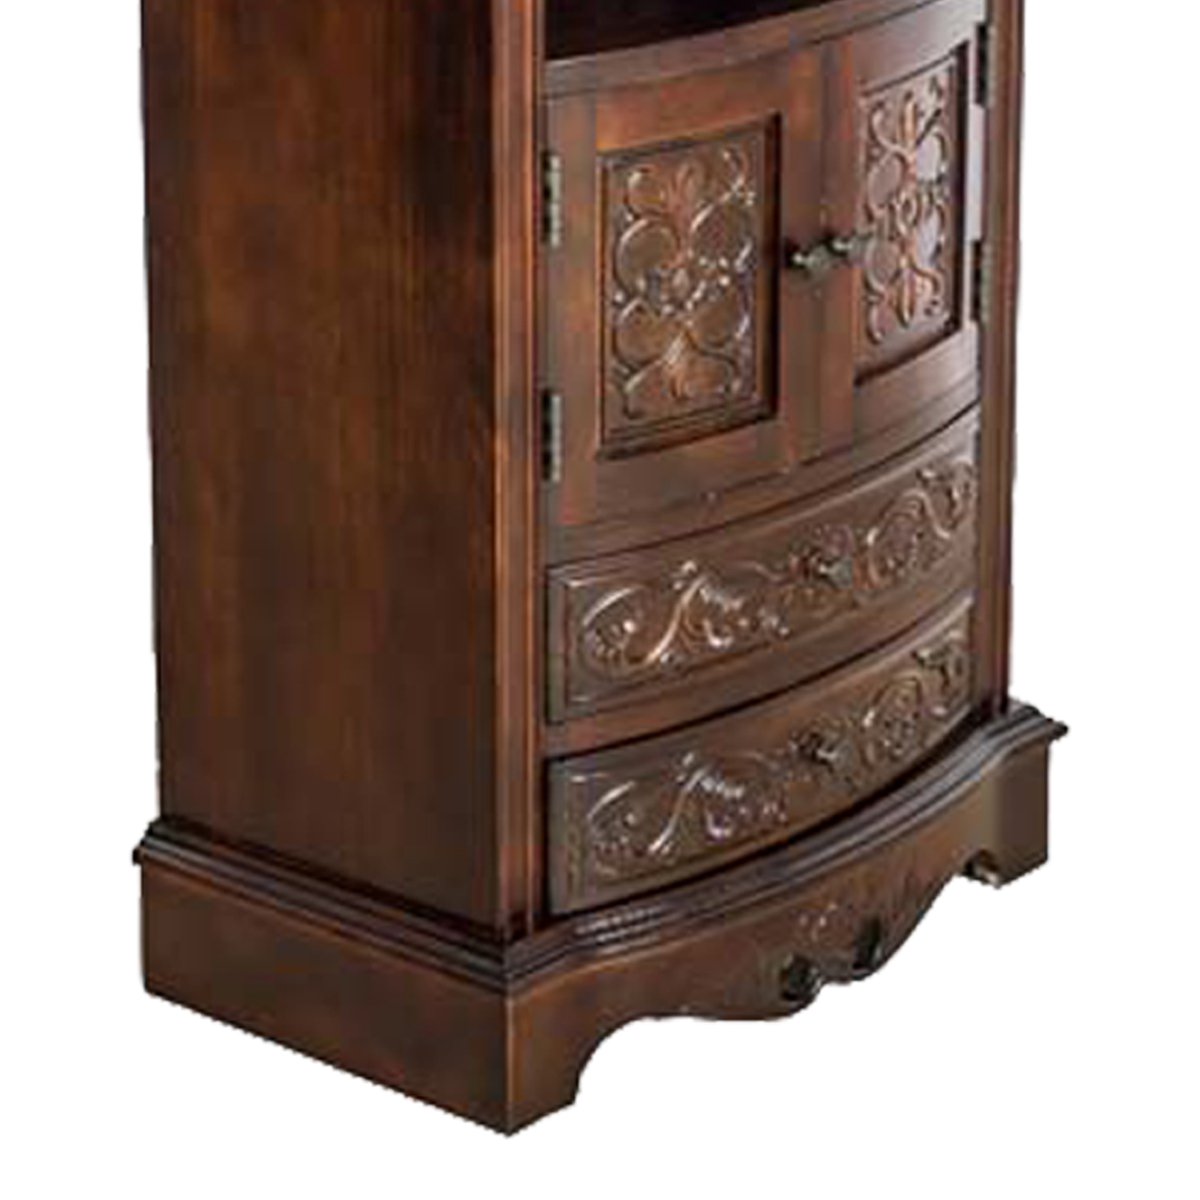 Engraved Wooden Frame Storage Cabinet with 2 Drawers and 2 Doors, Brown - BM210166